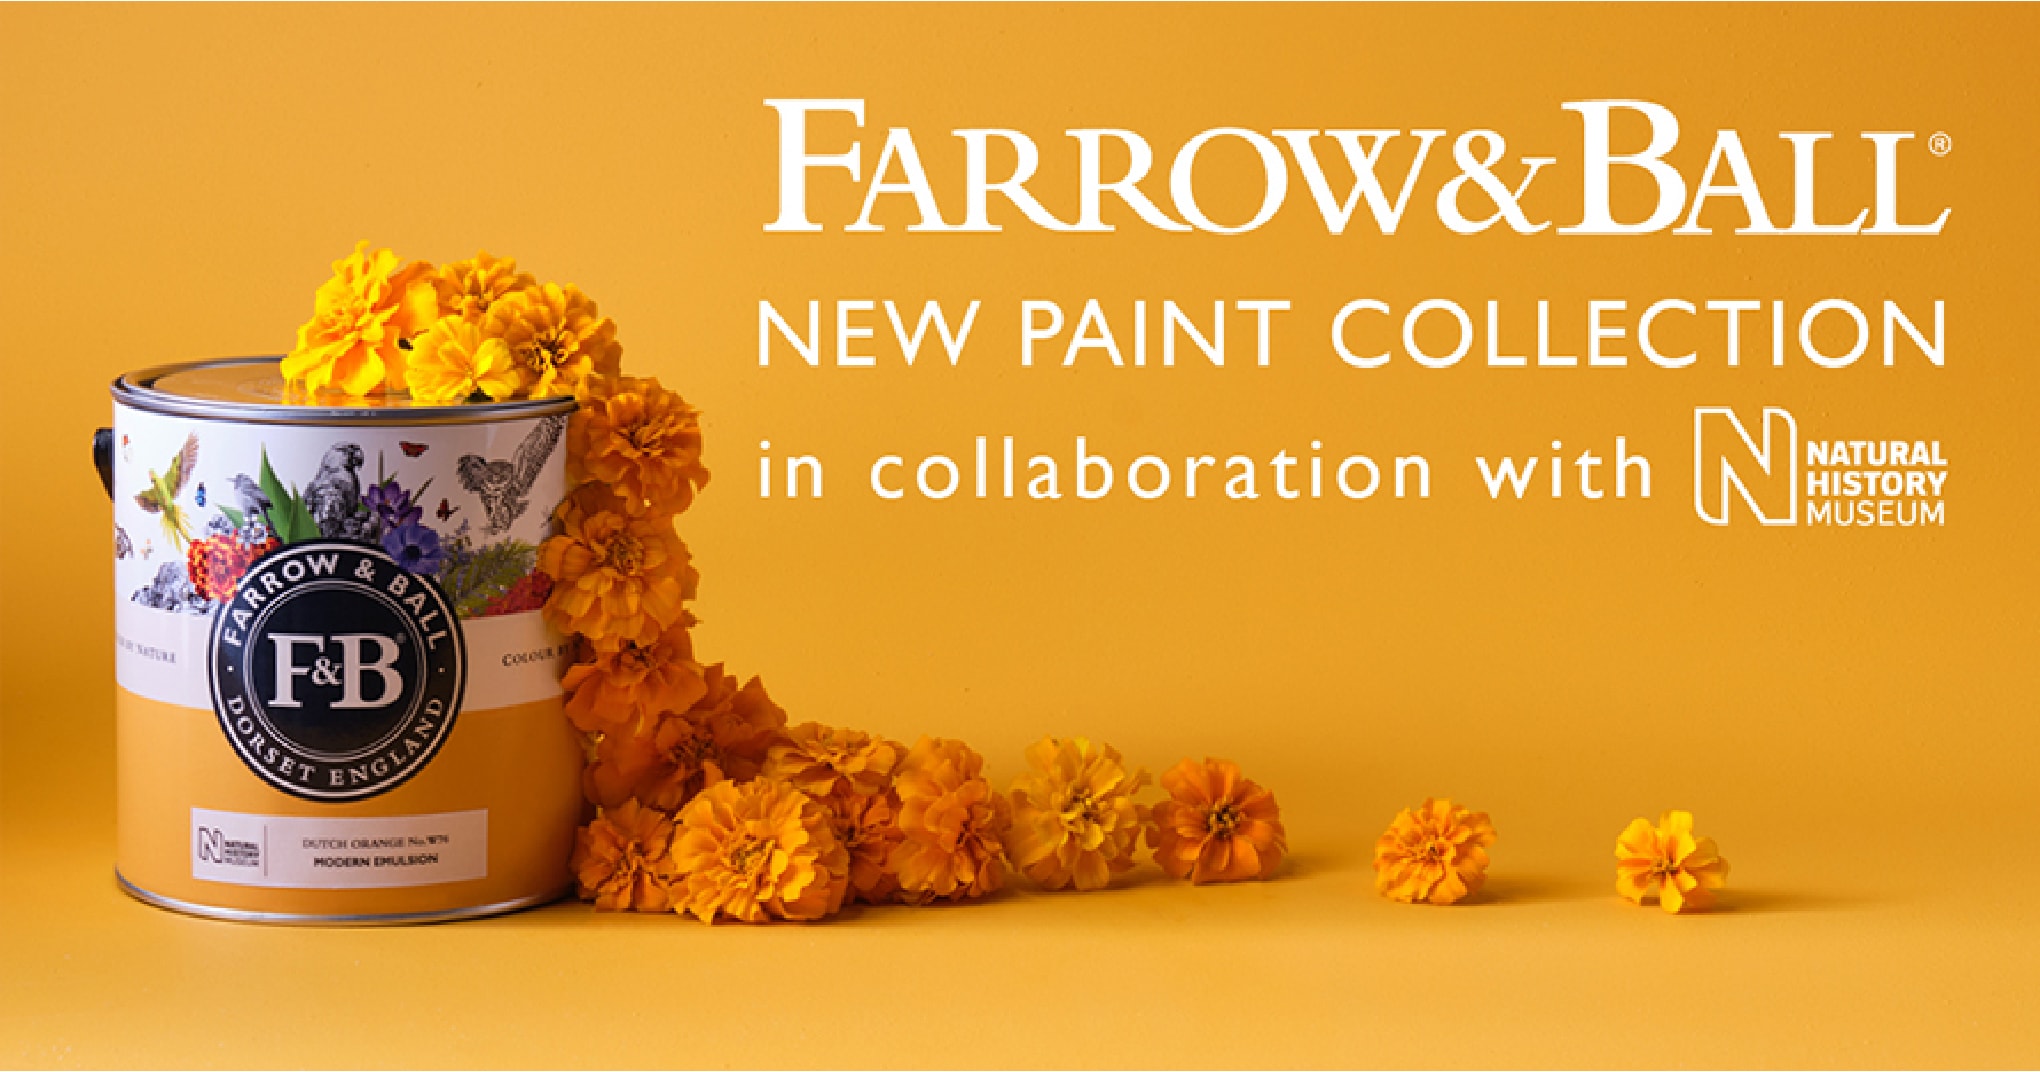 FARROW&BALL NEW PAINT COLLECTION in collaboration with NATURAL HISTORY MUSEUM